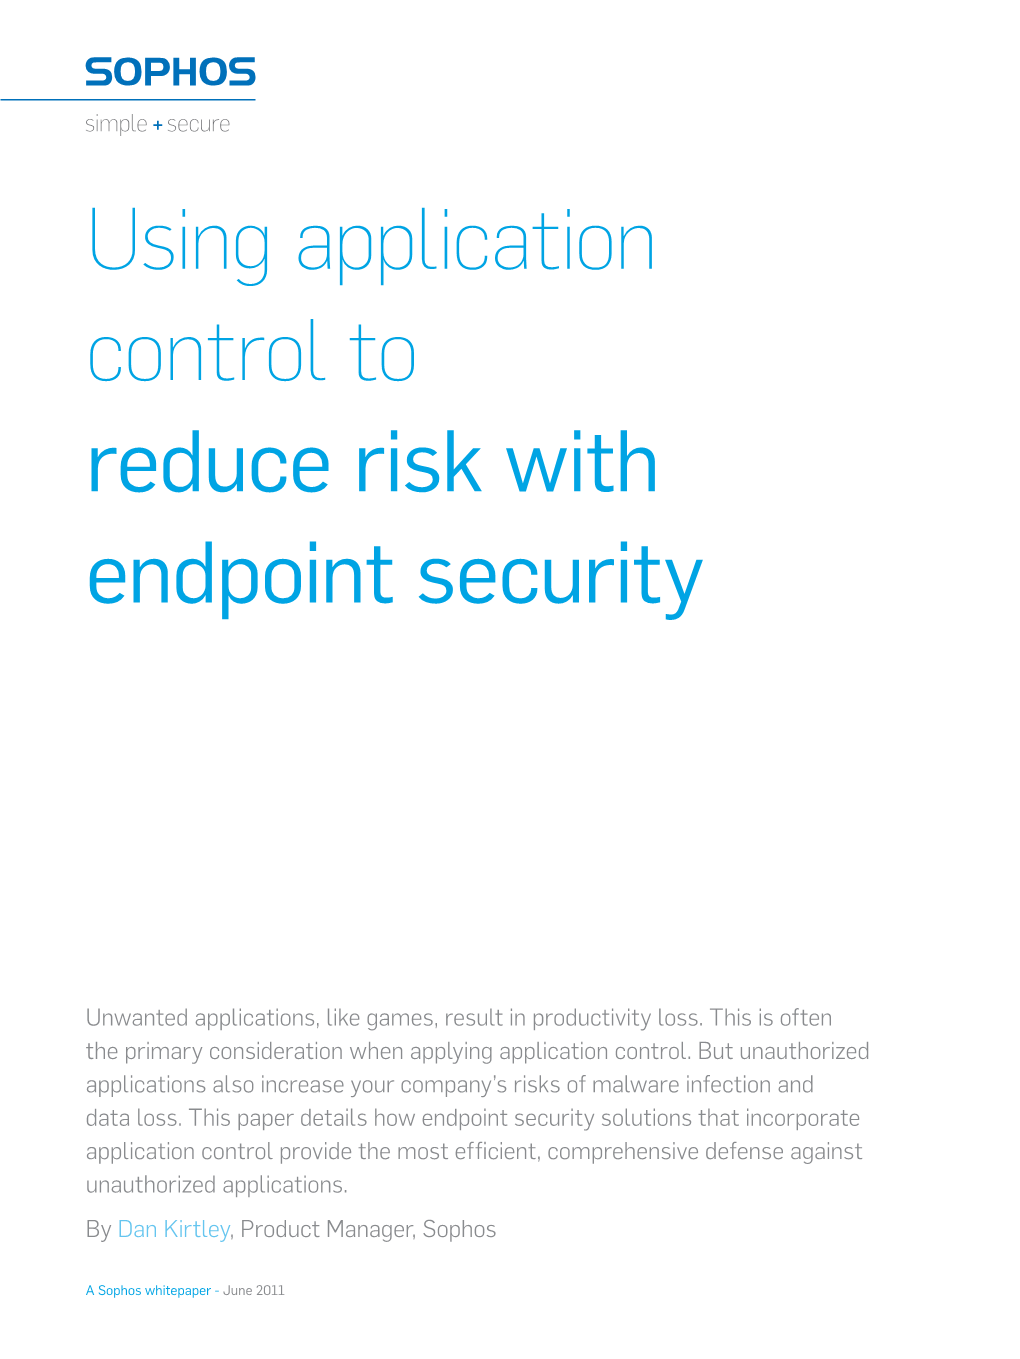 Using Application Control to Reduce Risk with Endpoint Security